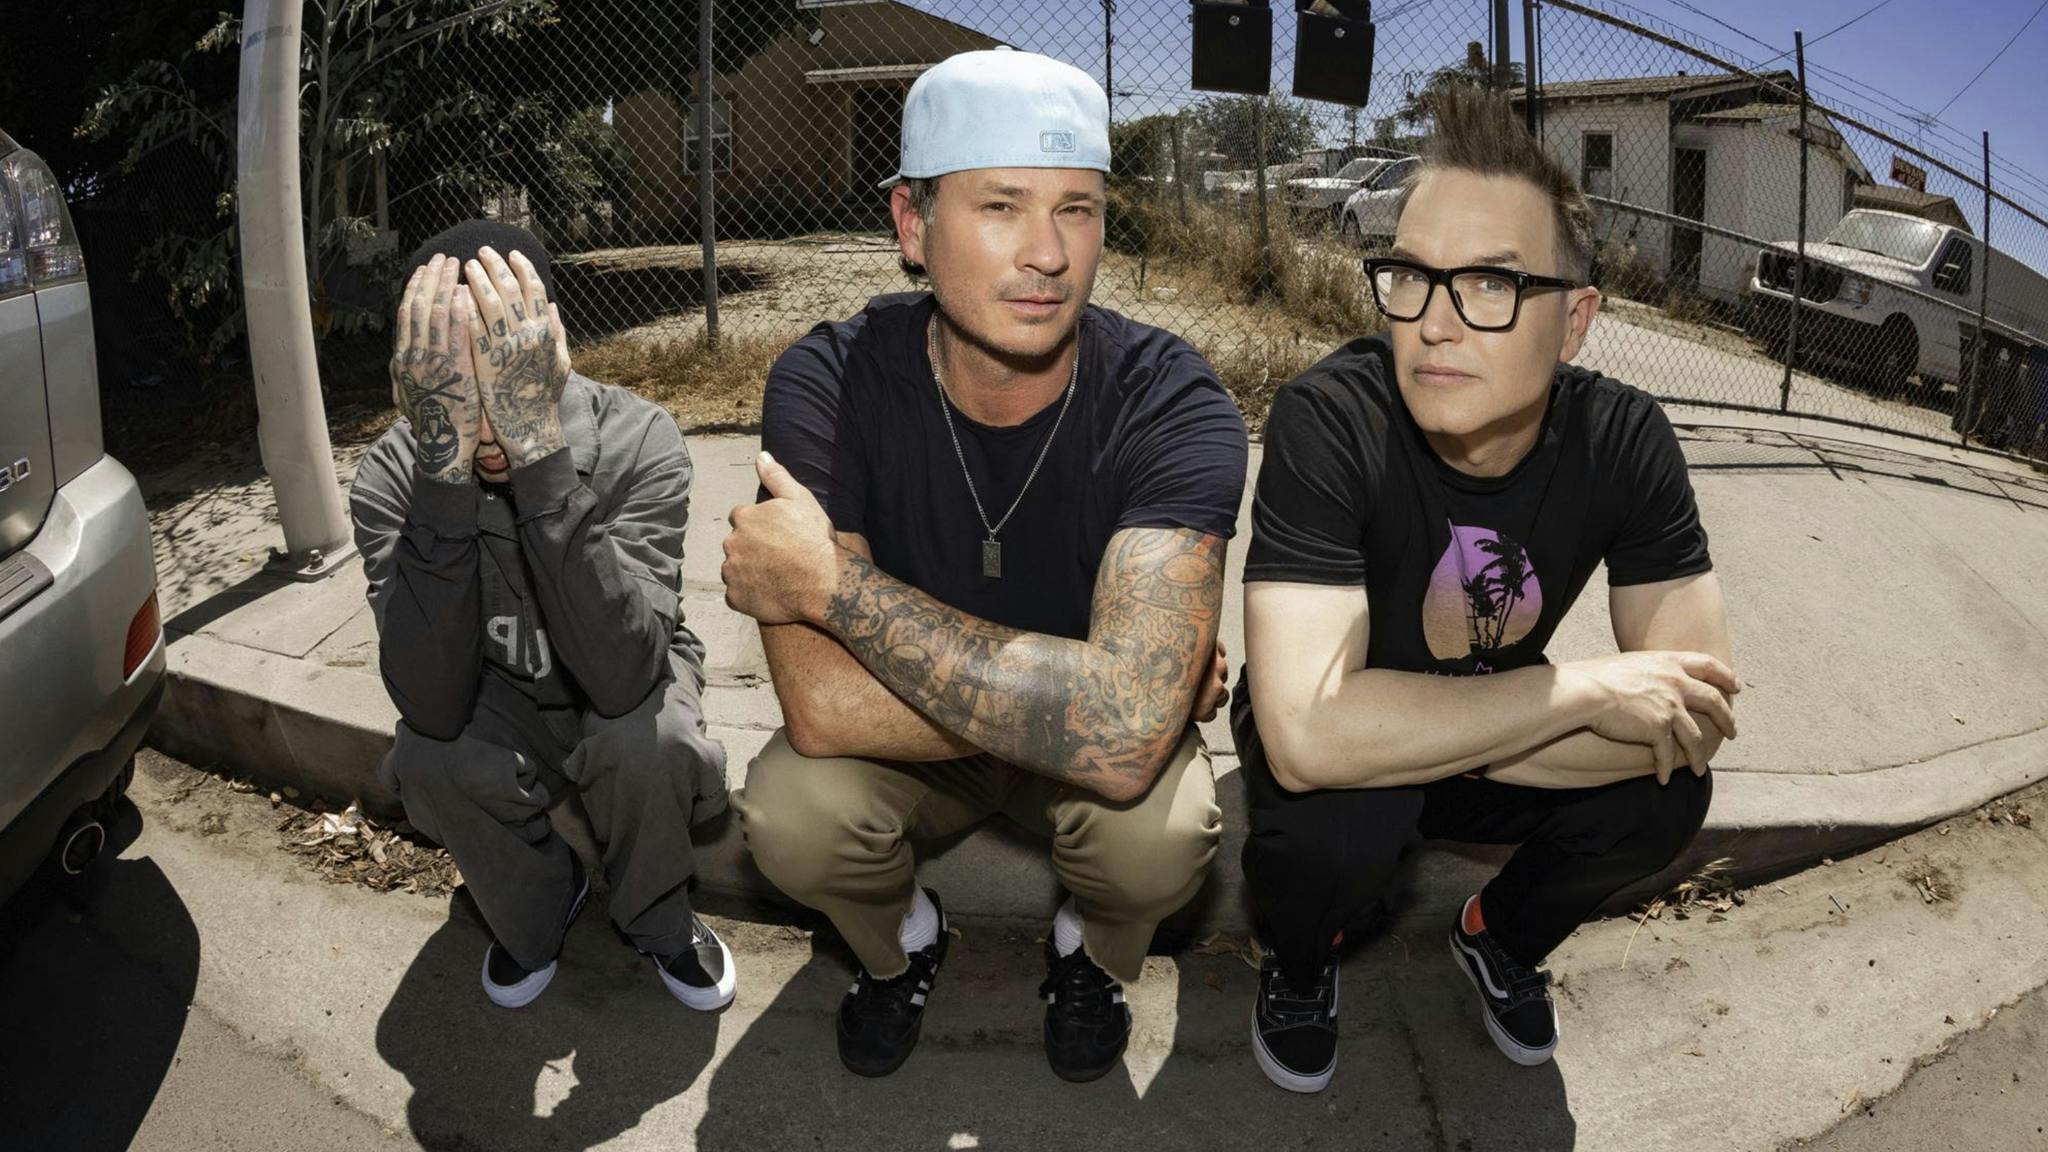 Here’s blink-182’s setlist from their first Australian tour in over 10 years